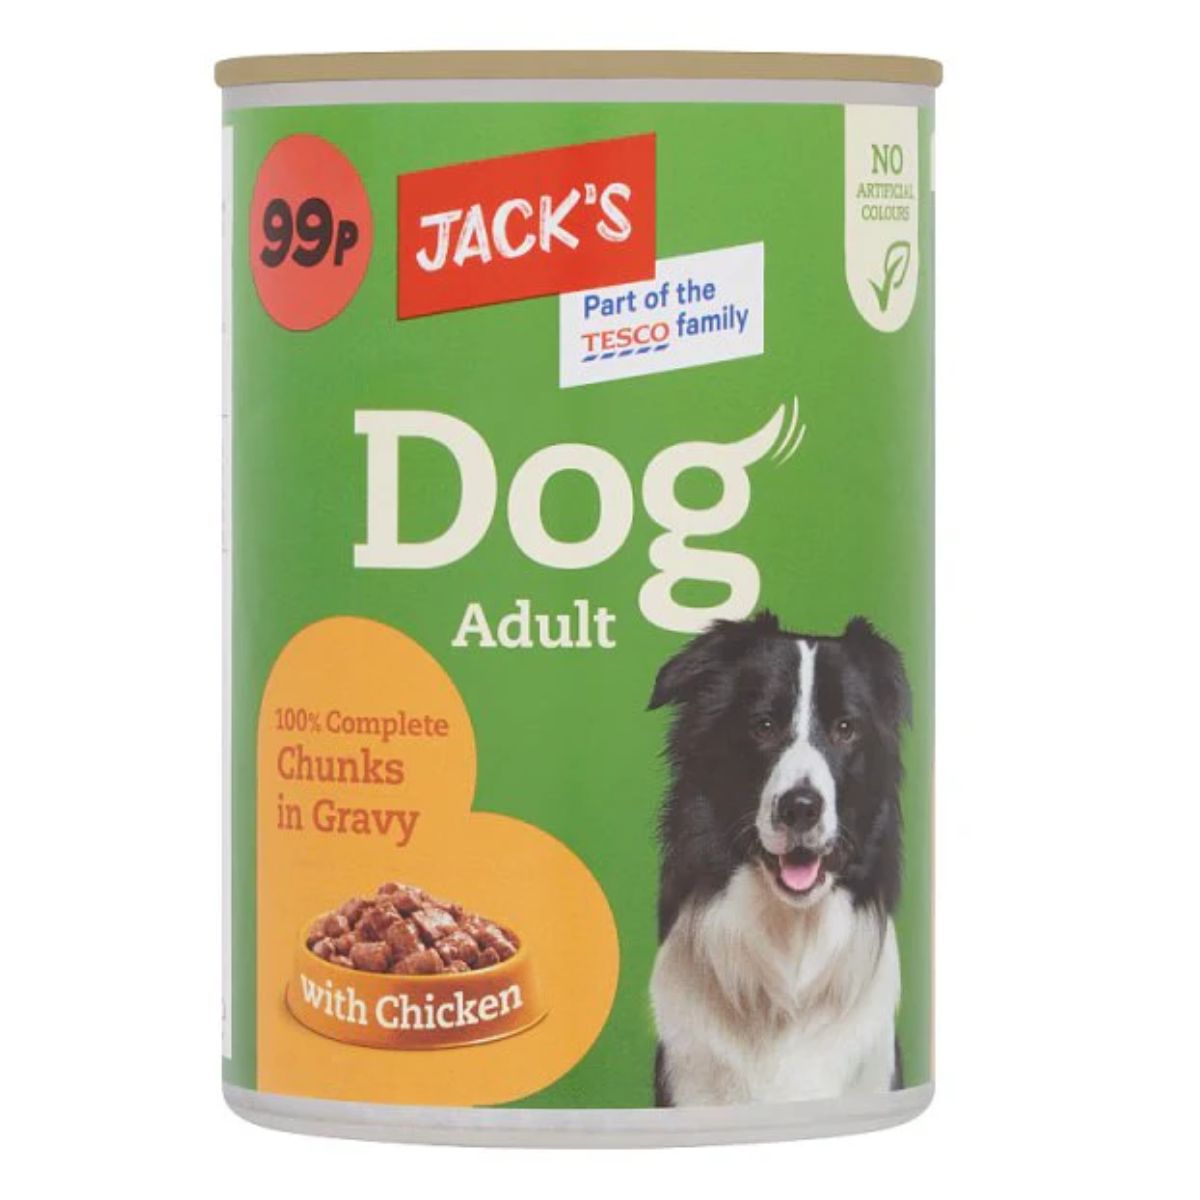 A can of Jack's - Dog Adult 100% Complete Chunks in Jelly with Chicken featuring chunks in gravy with chicken, showing a border collie on the label.